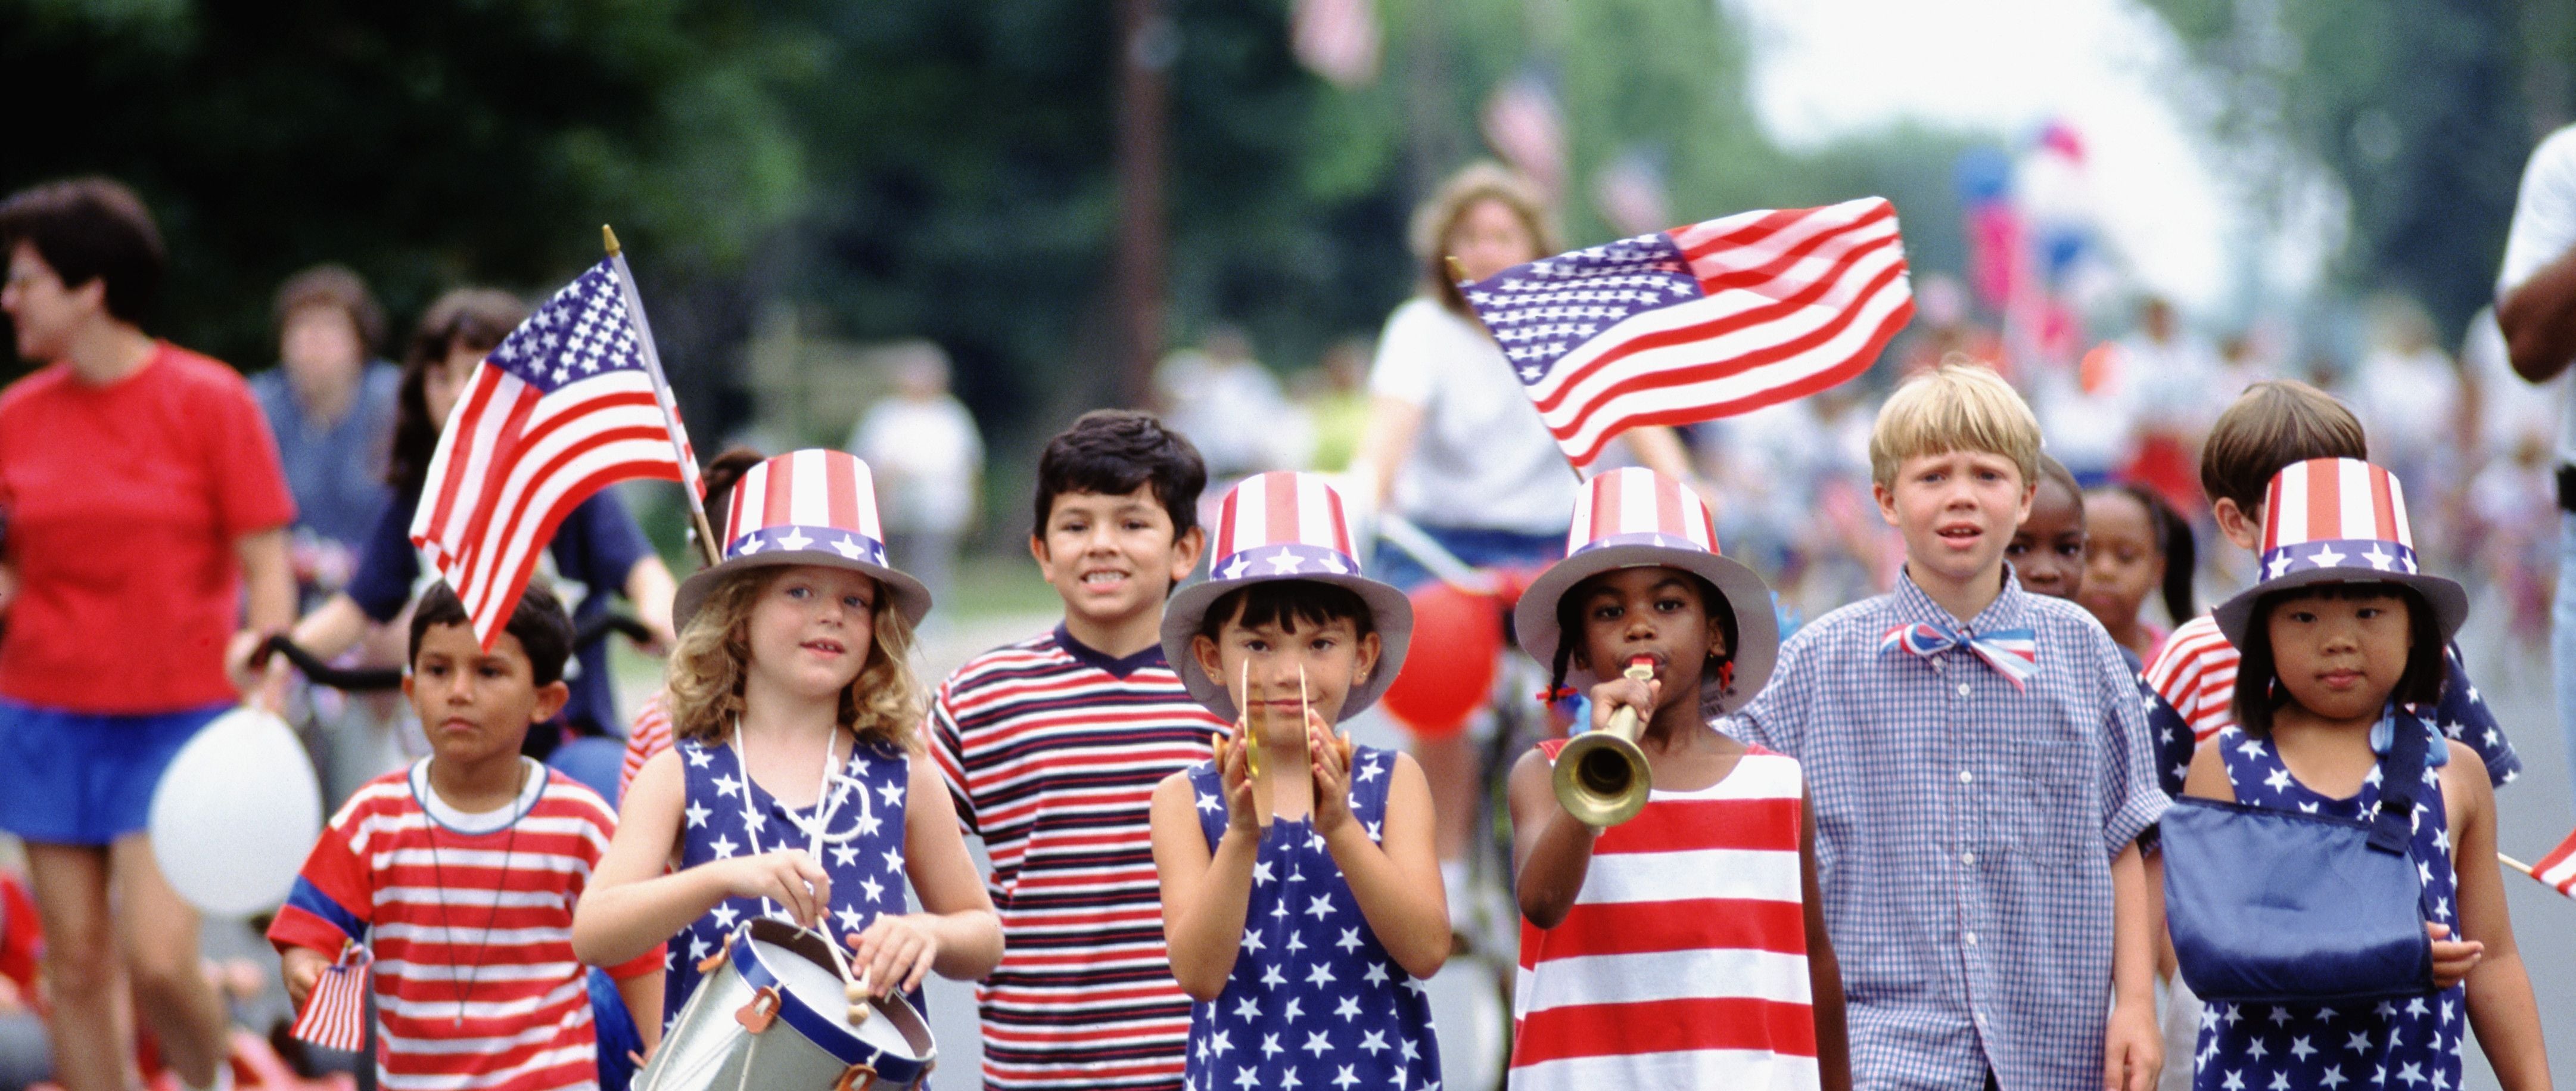 Children of different ethnicities march together on Independence Day